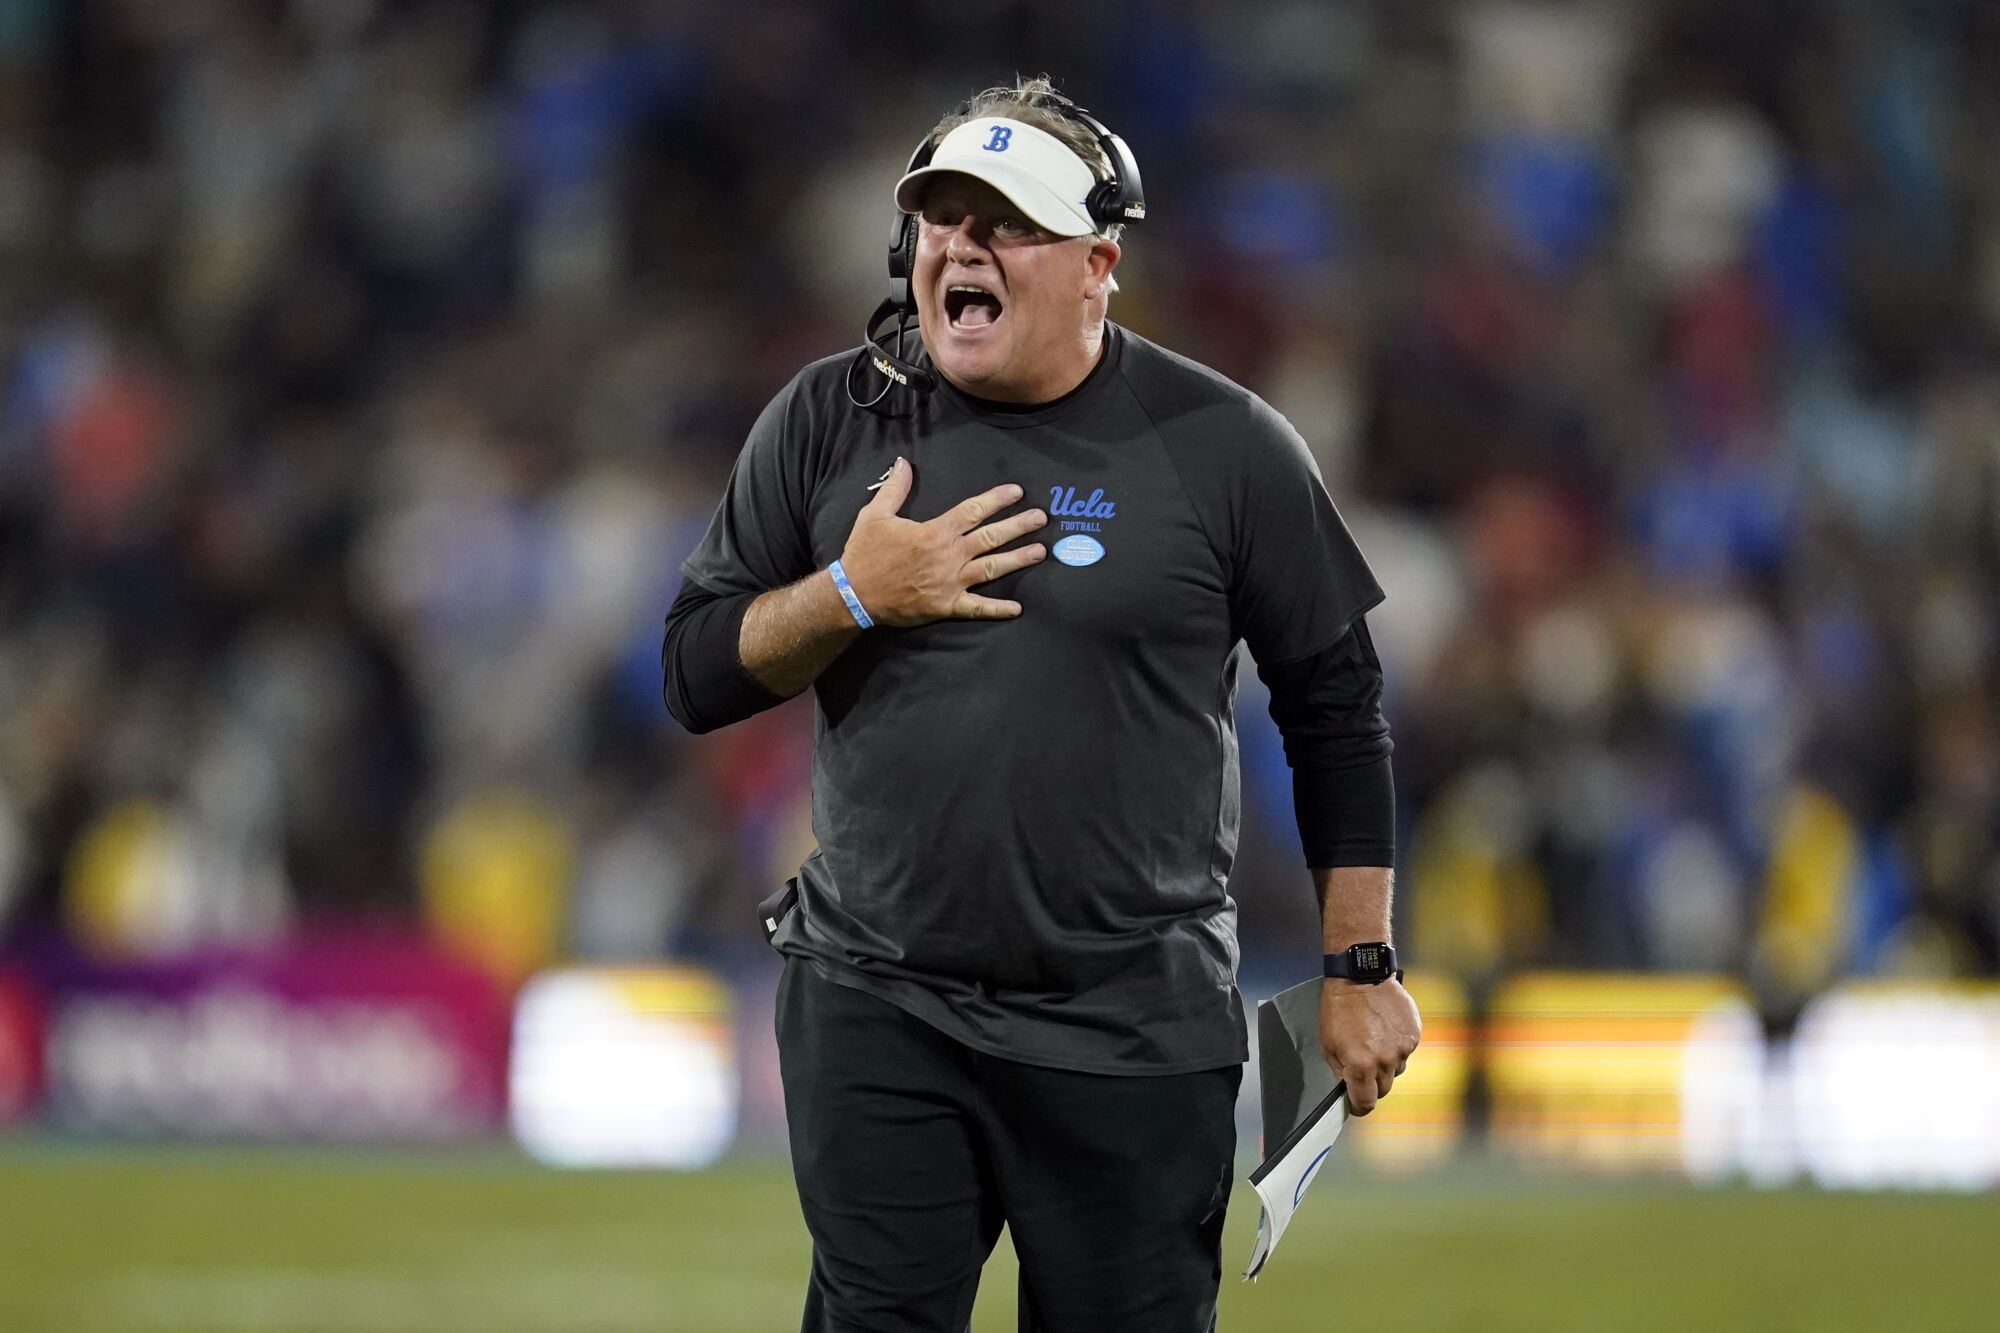 UCLA coach Chip Kelly yells instructions to one of his players from the sideline during a game